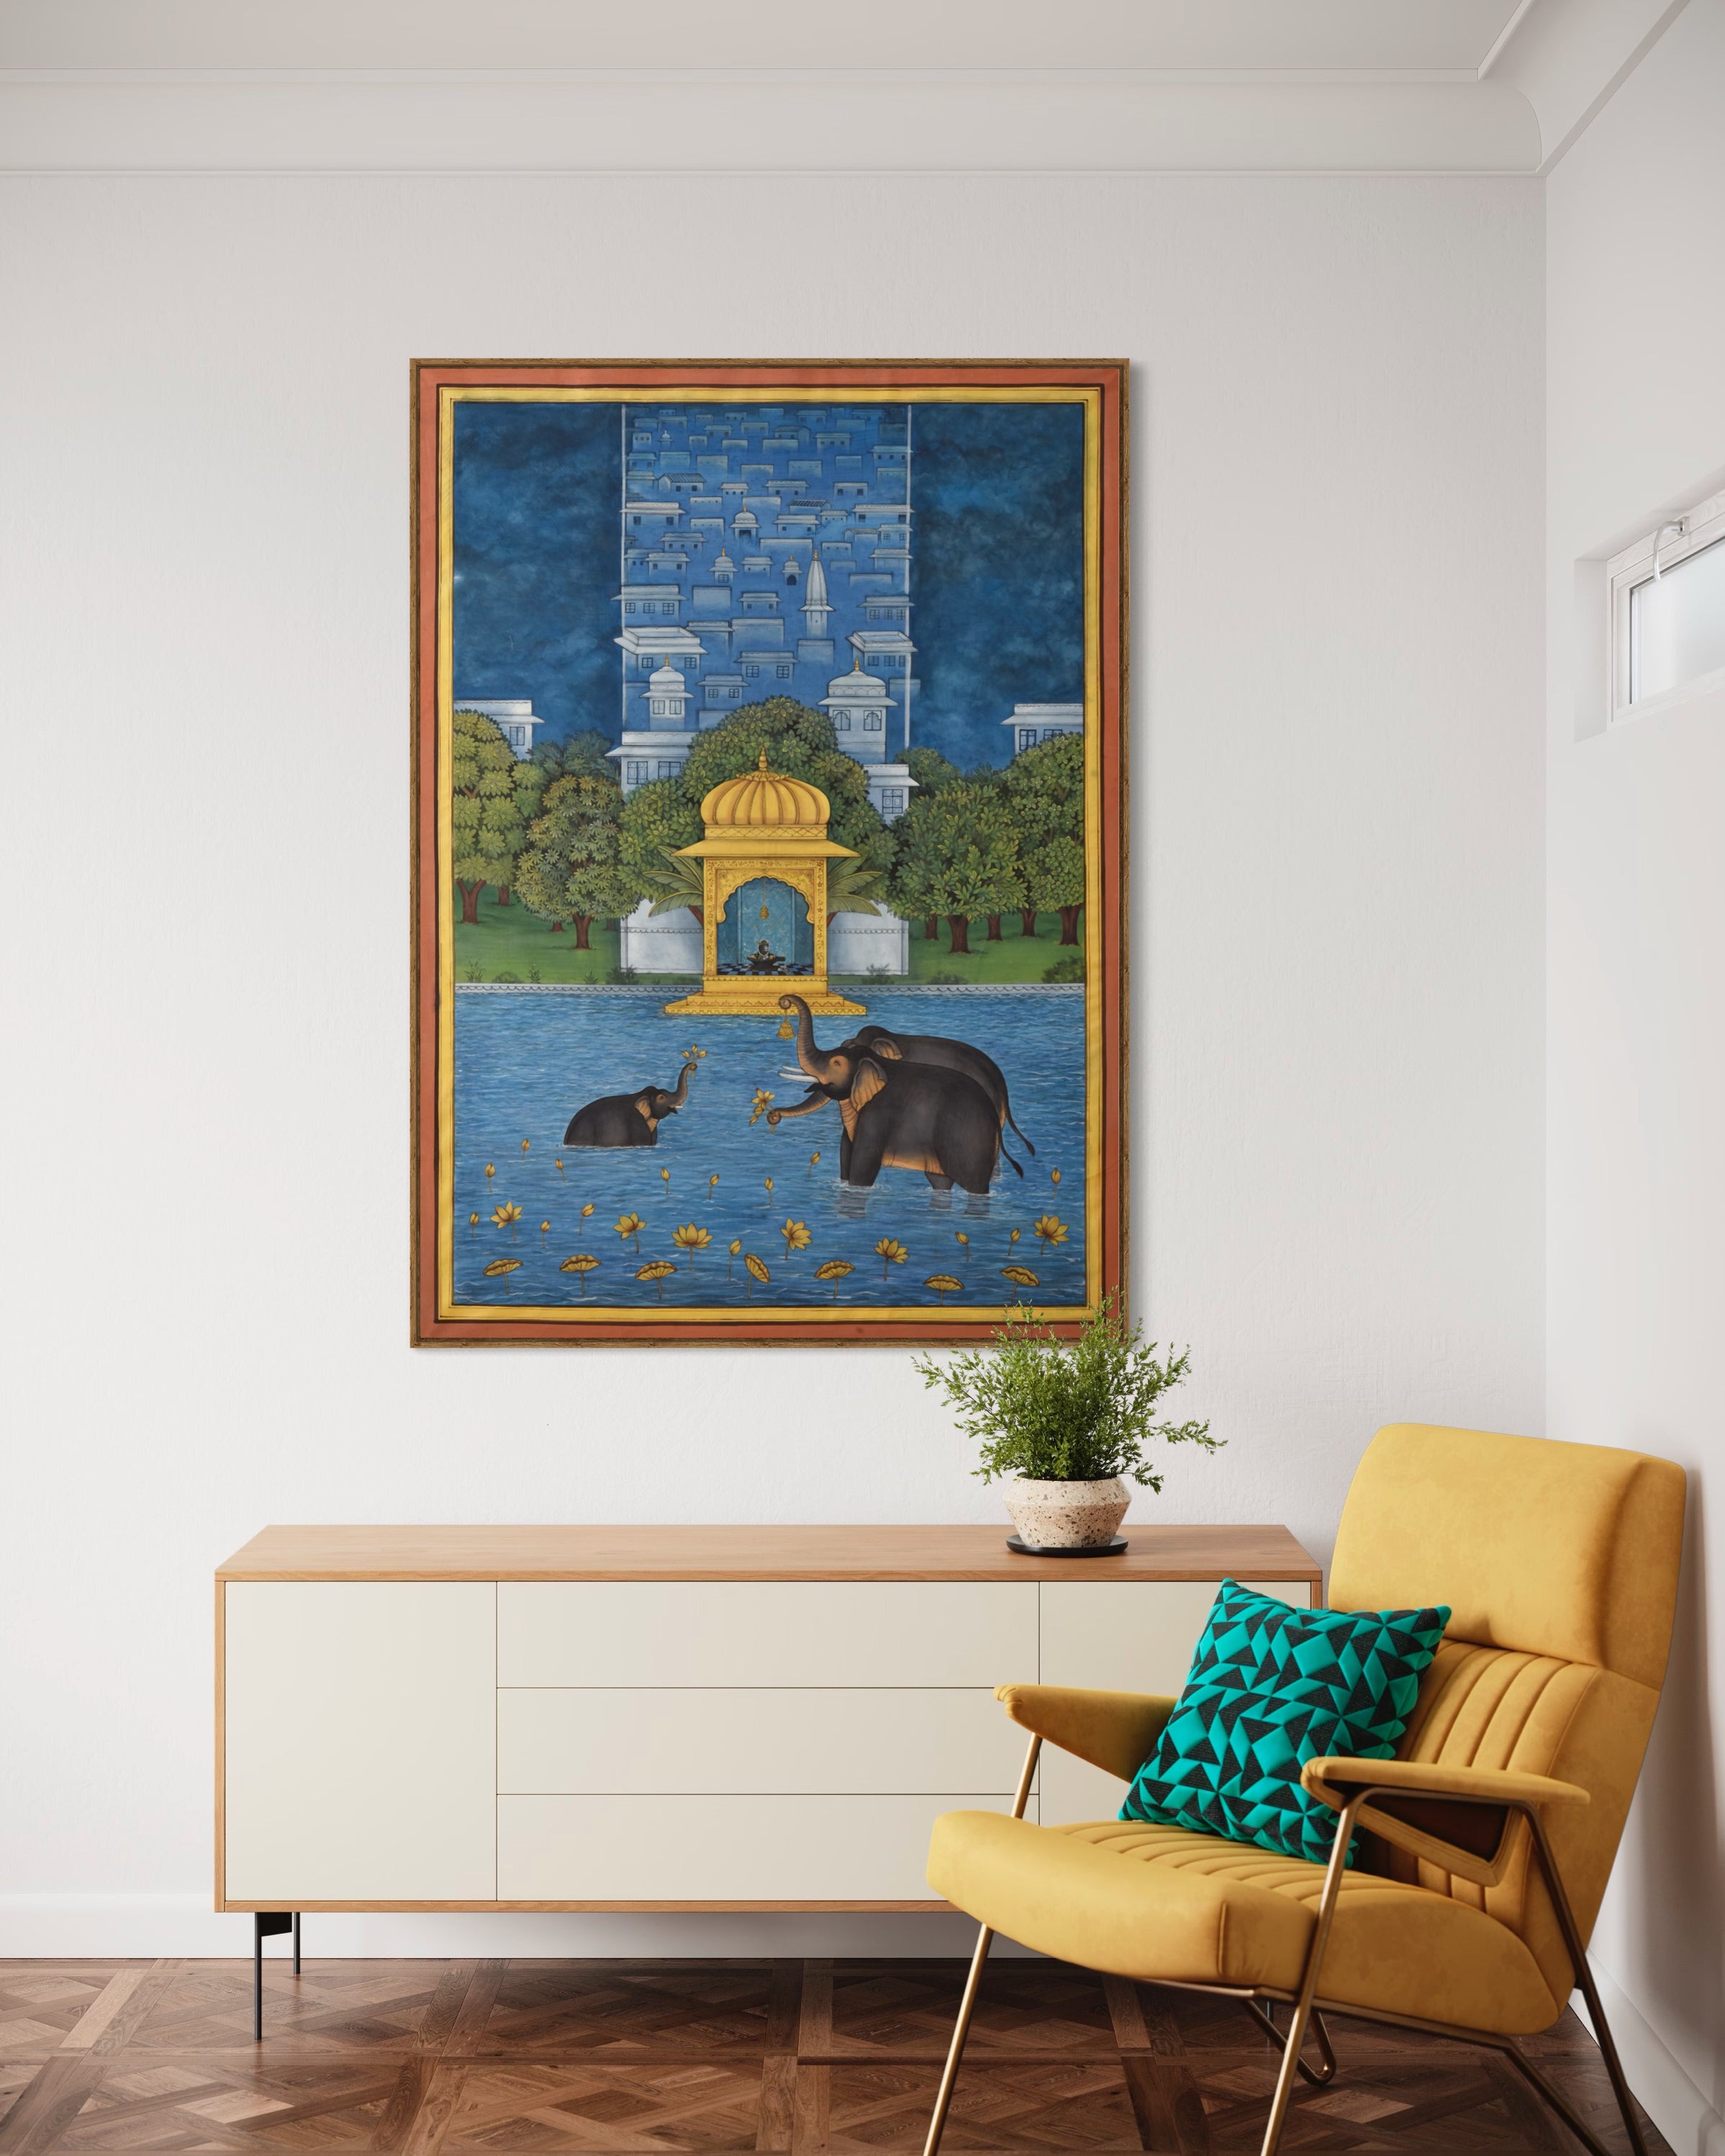 Pichwai Painting | Elephants Playing in Lake | Modern Home